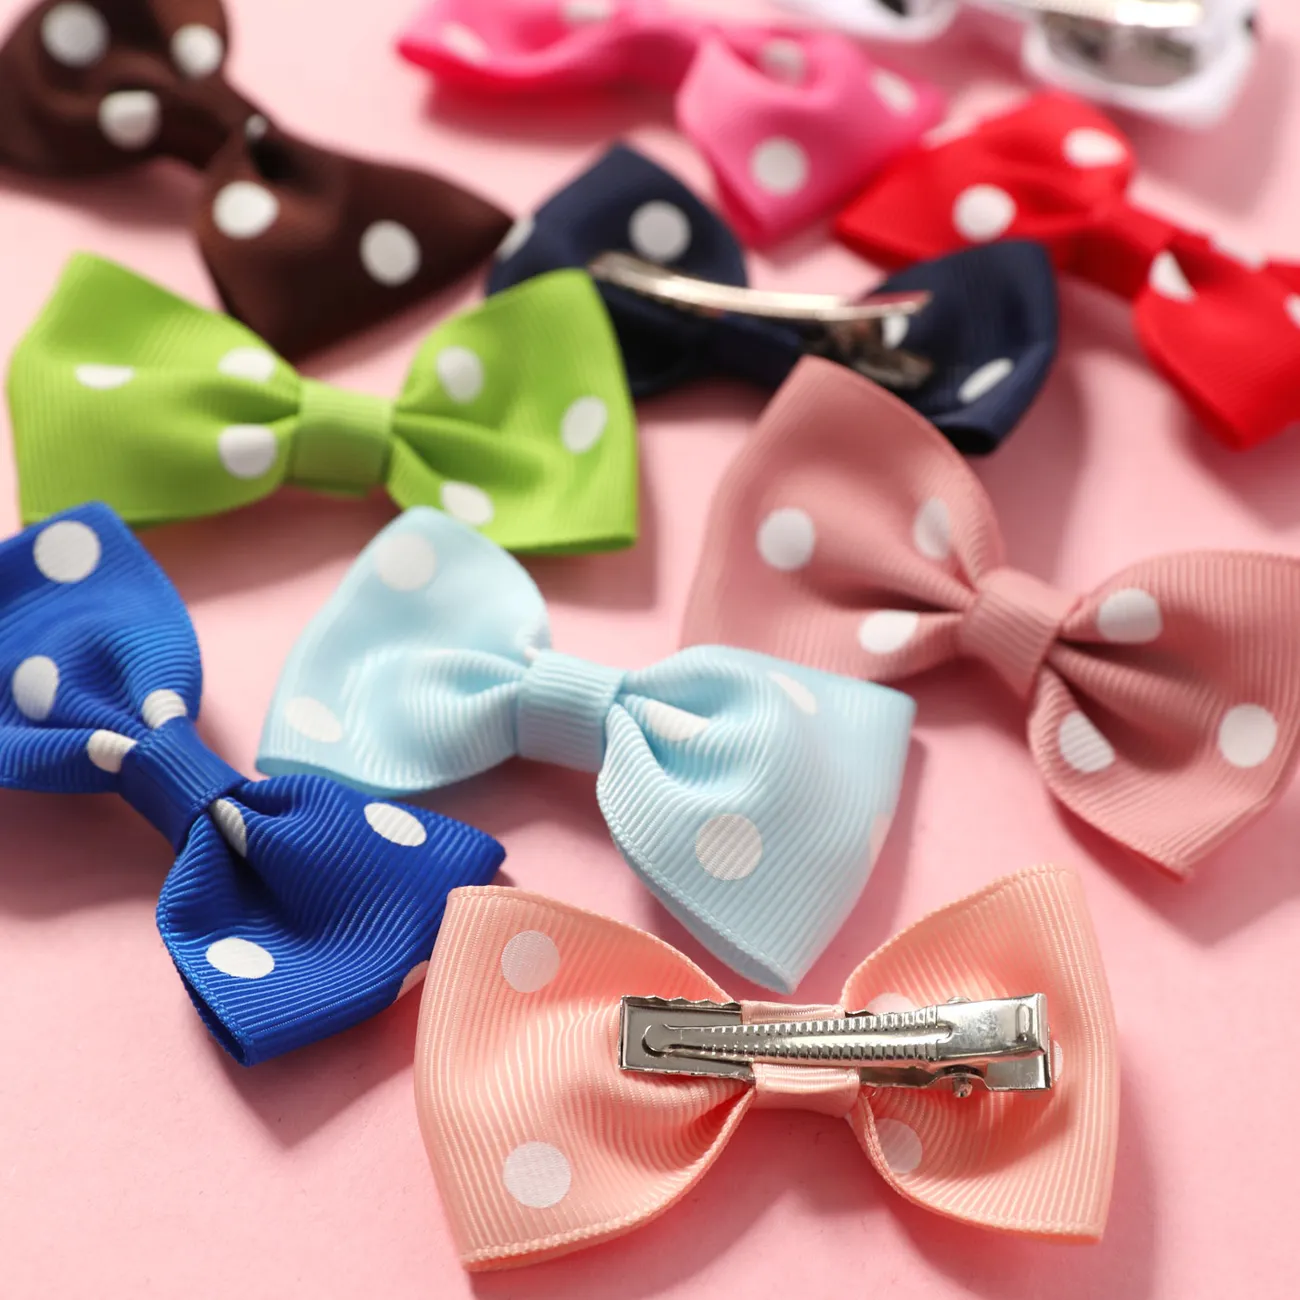 10-pack Ribbed Polka Dots Bow Hair Clips Hair Accessories for Girls Color-B big image 1